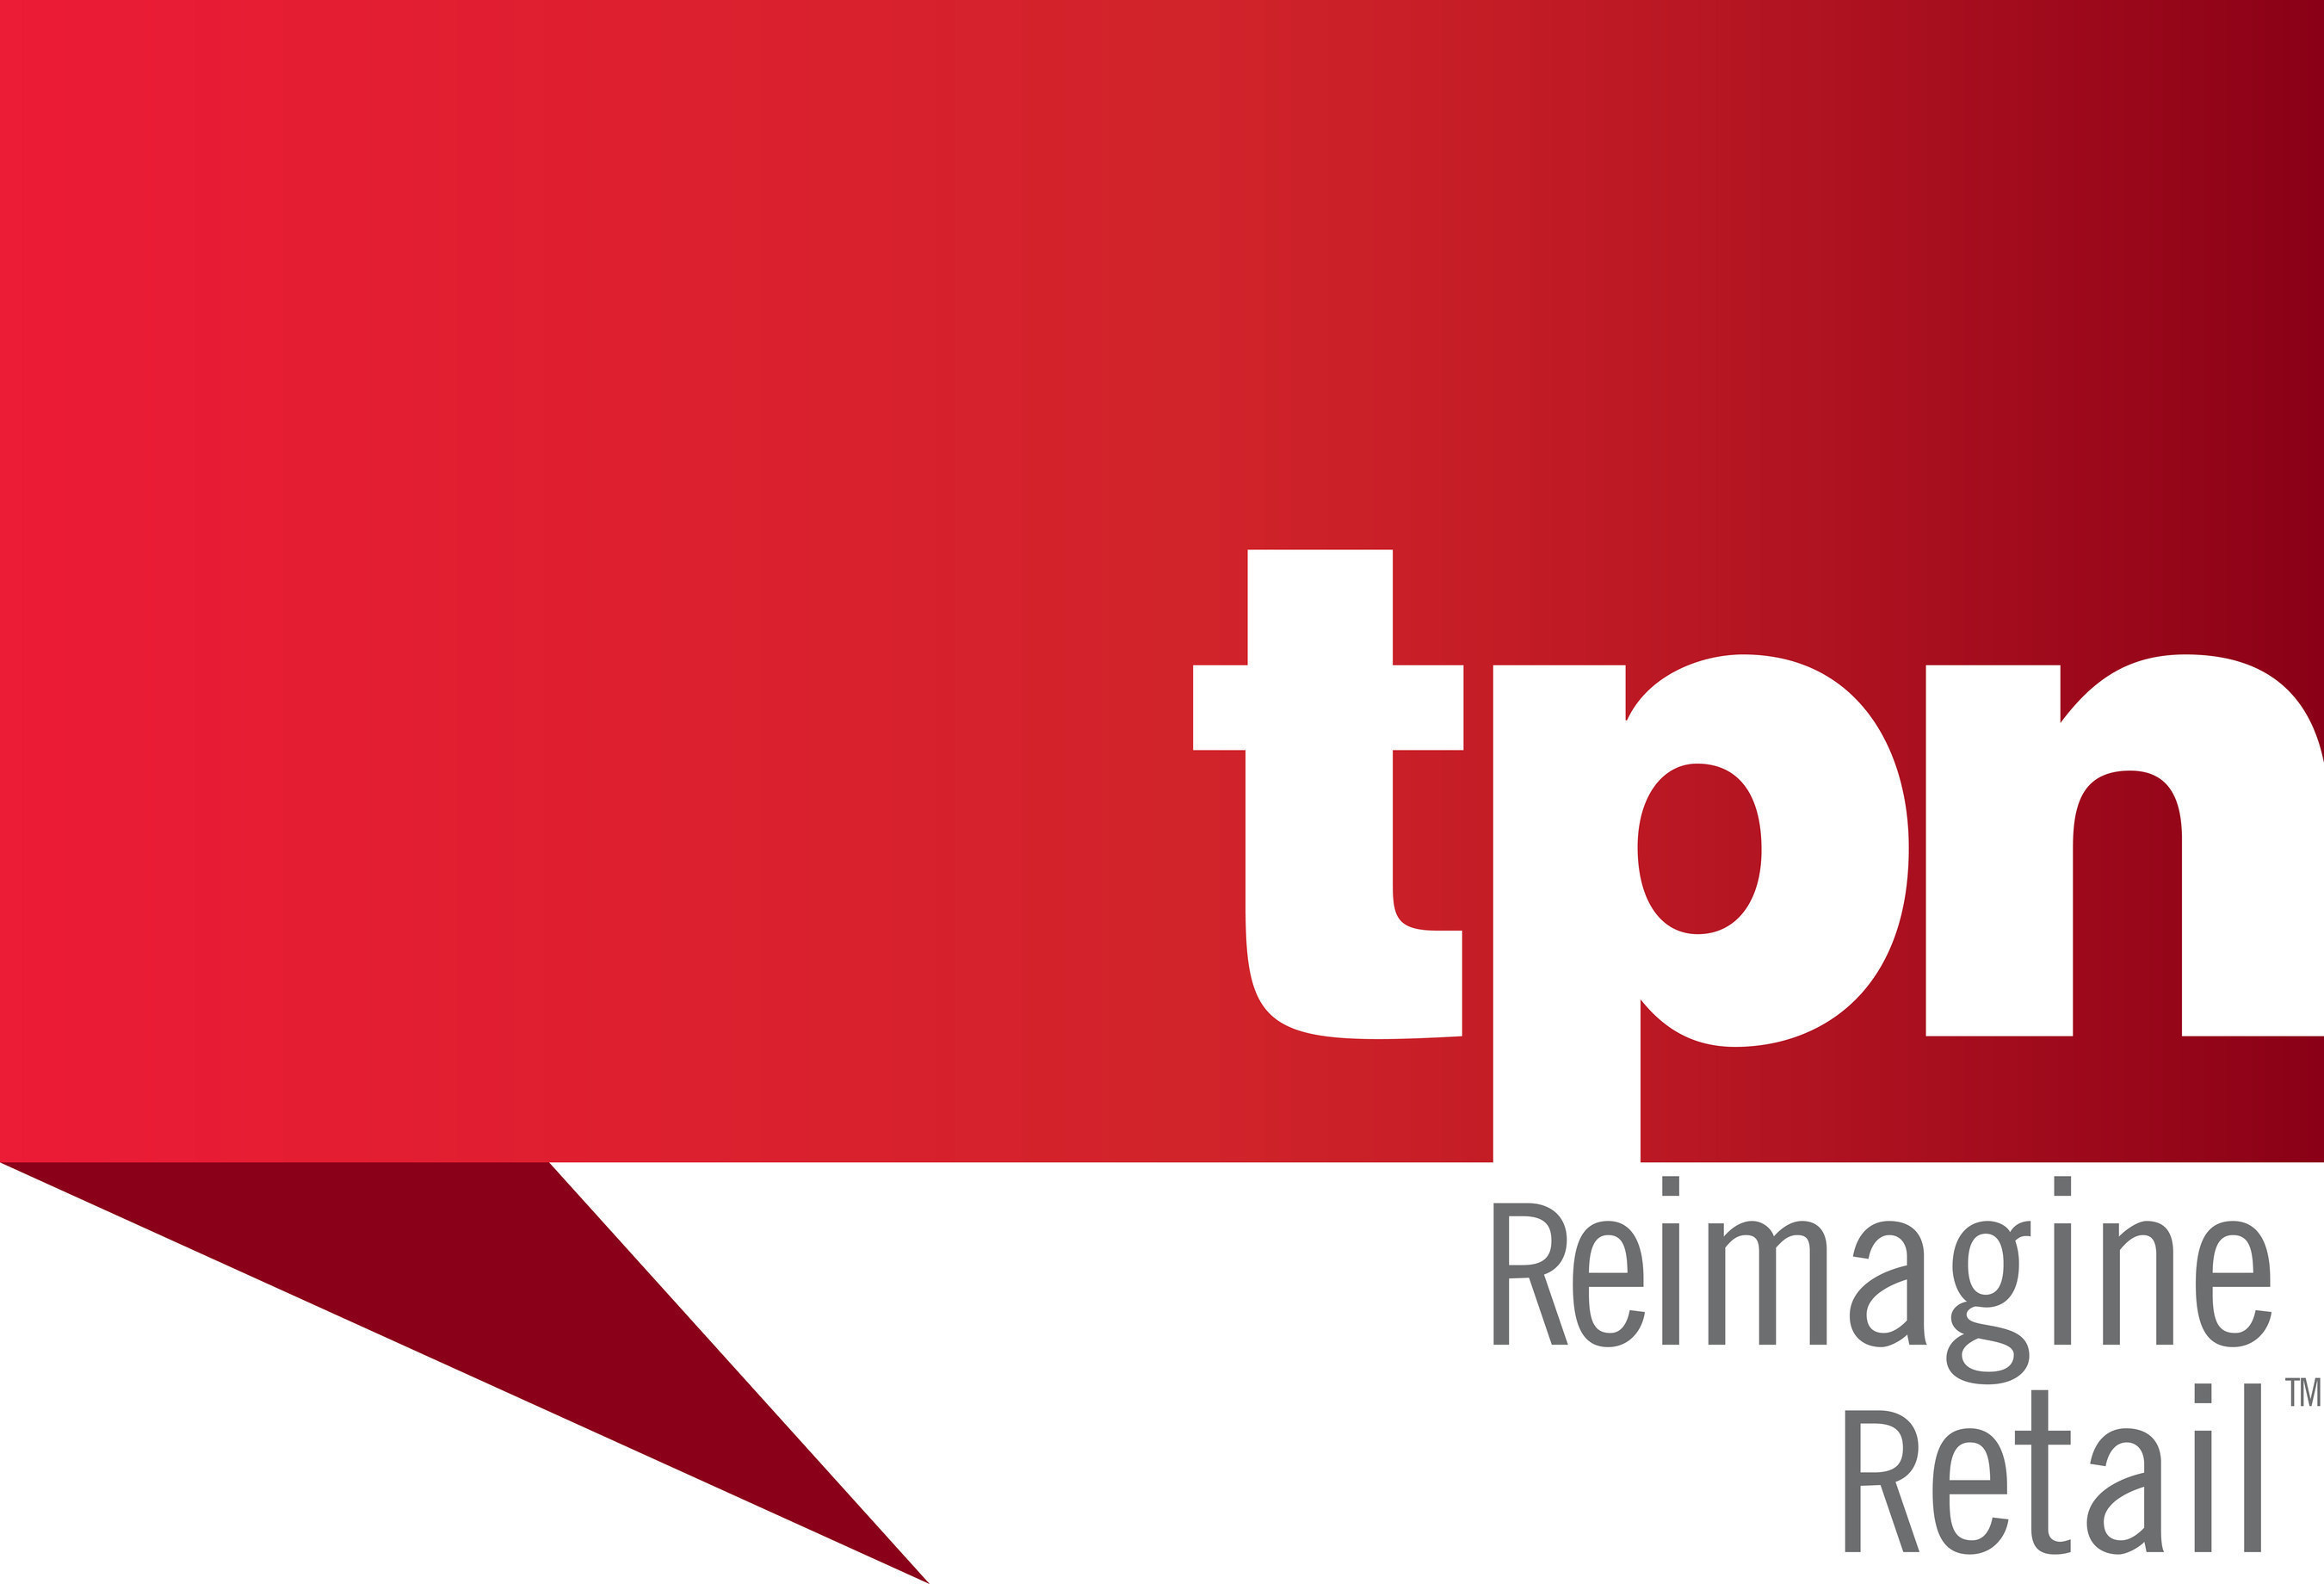 TPN is a dynamic-retail marketing agency born in tradition, fueled by innovation, and living at the intersection of commerce and imagination.